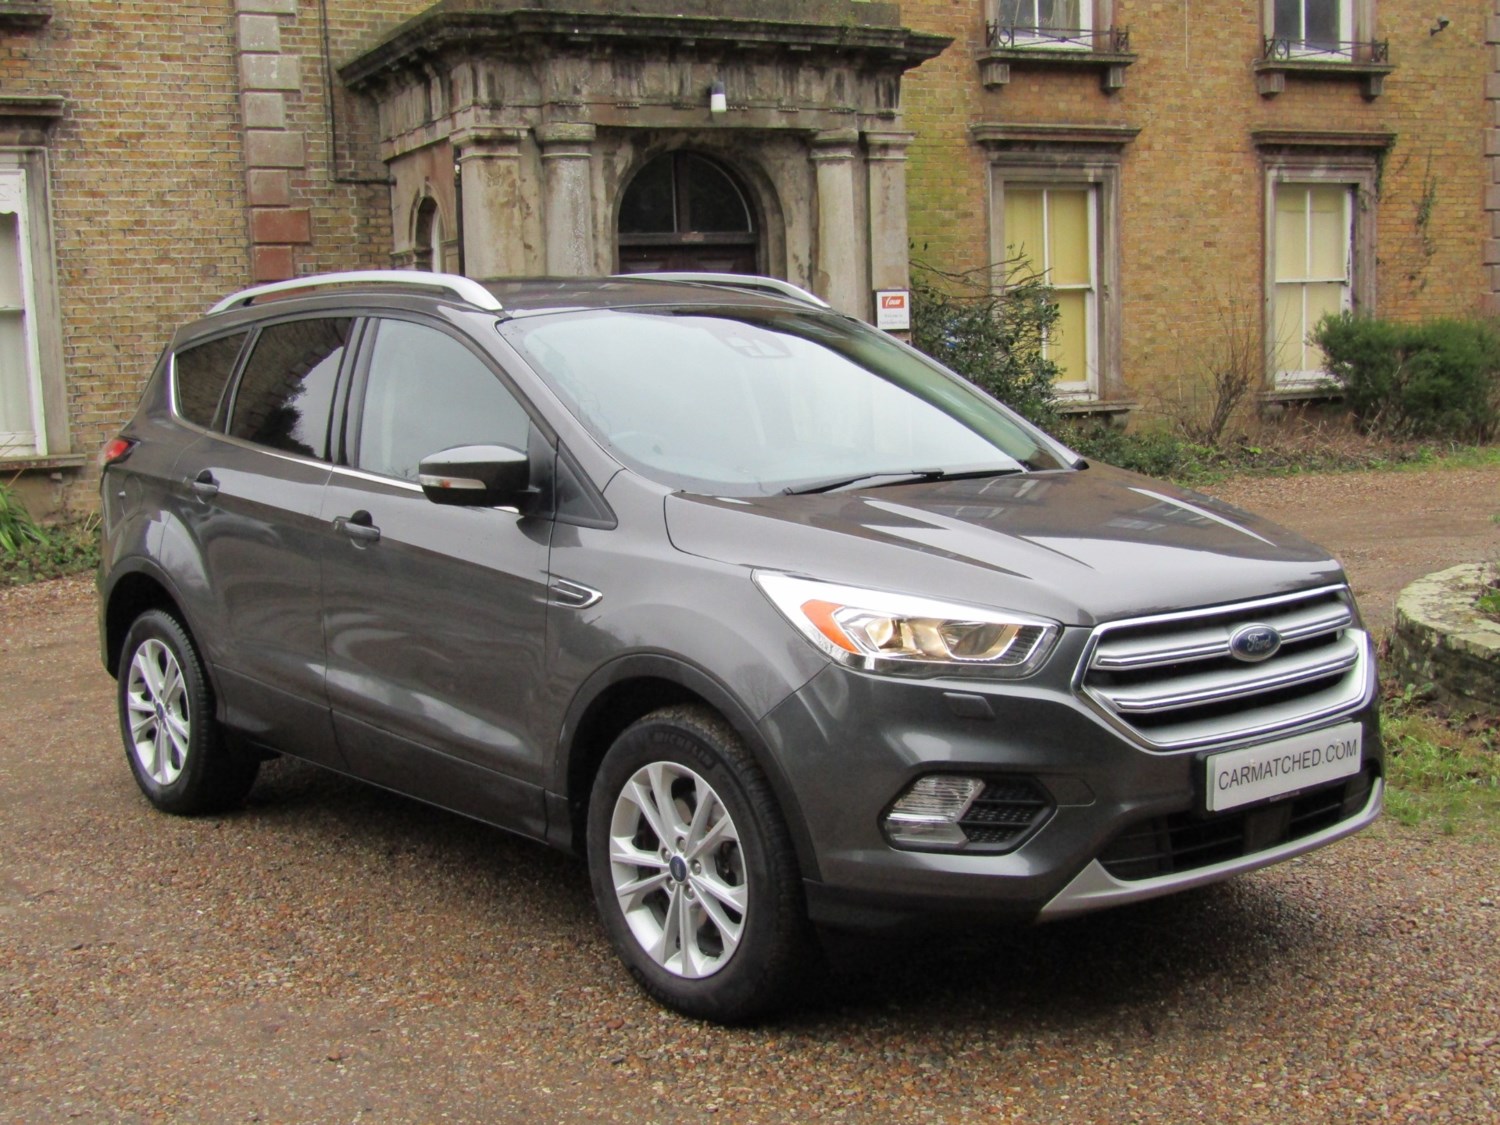 2017 (17) Ford Kuga 1.5 TDCi Titanium 5dr 2WD For Sale In Broadstairs, Kent